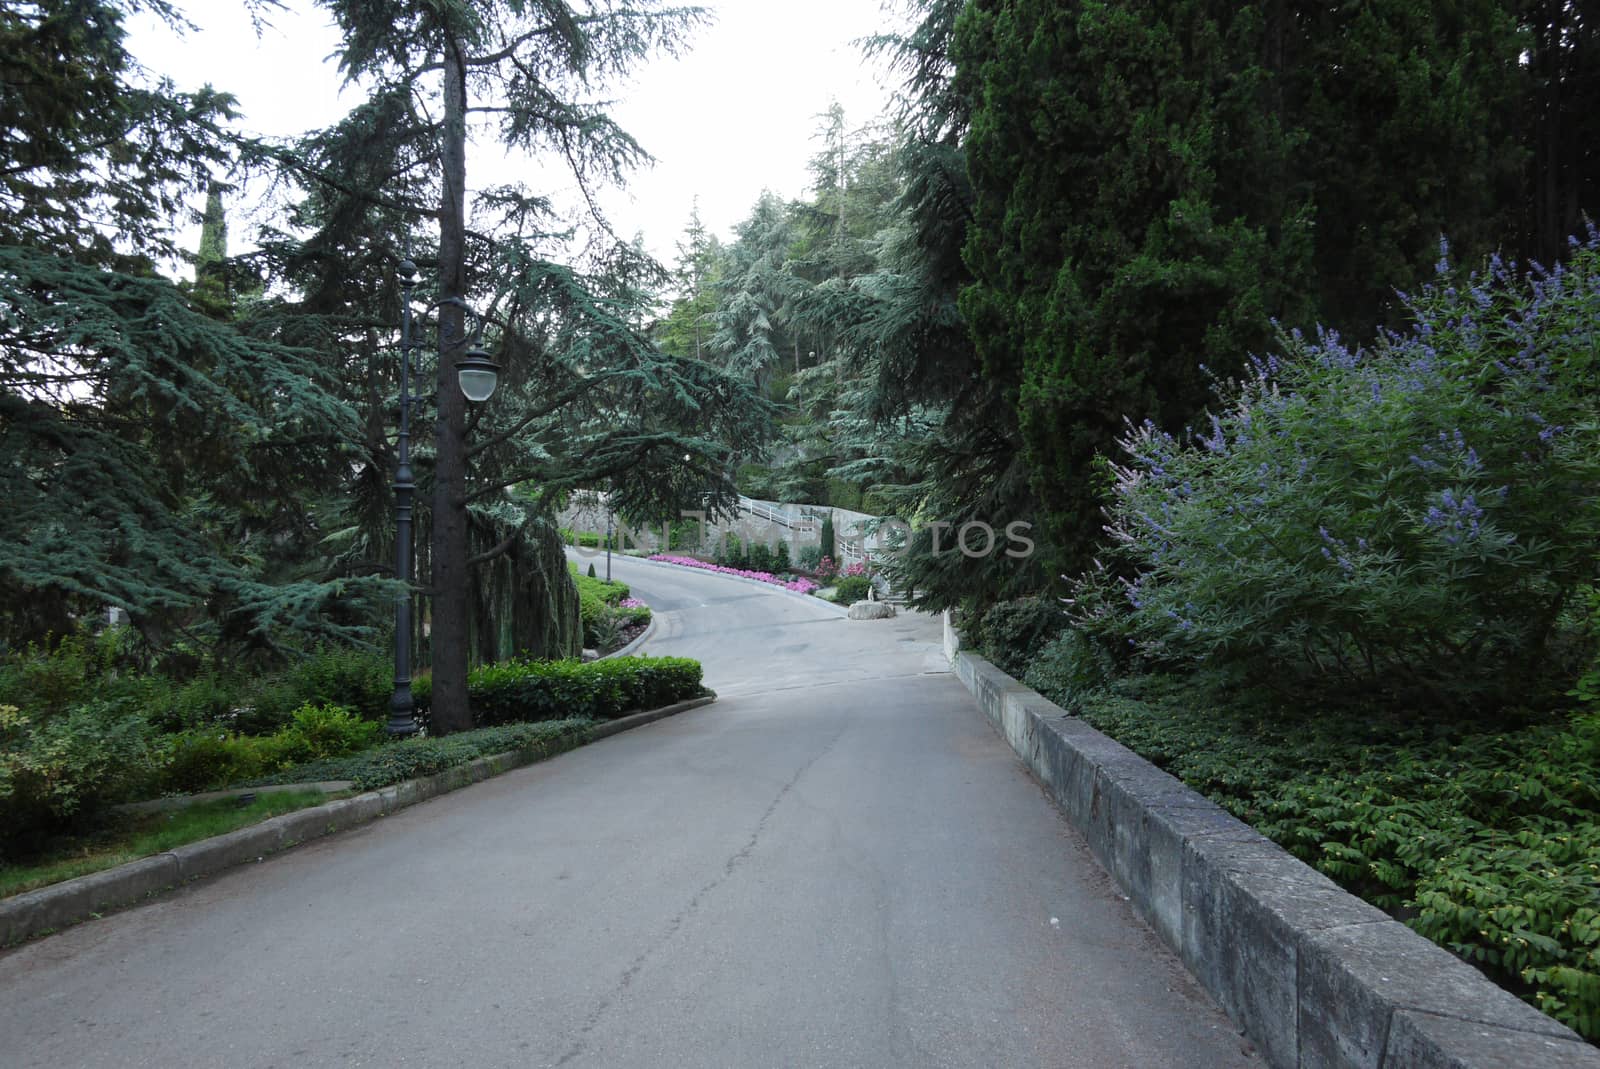 Asphalt road with beautiful ornamental trees and bushes on the sides descending into the green park zone by Adamchuk